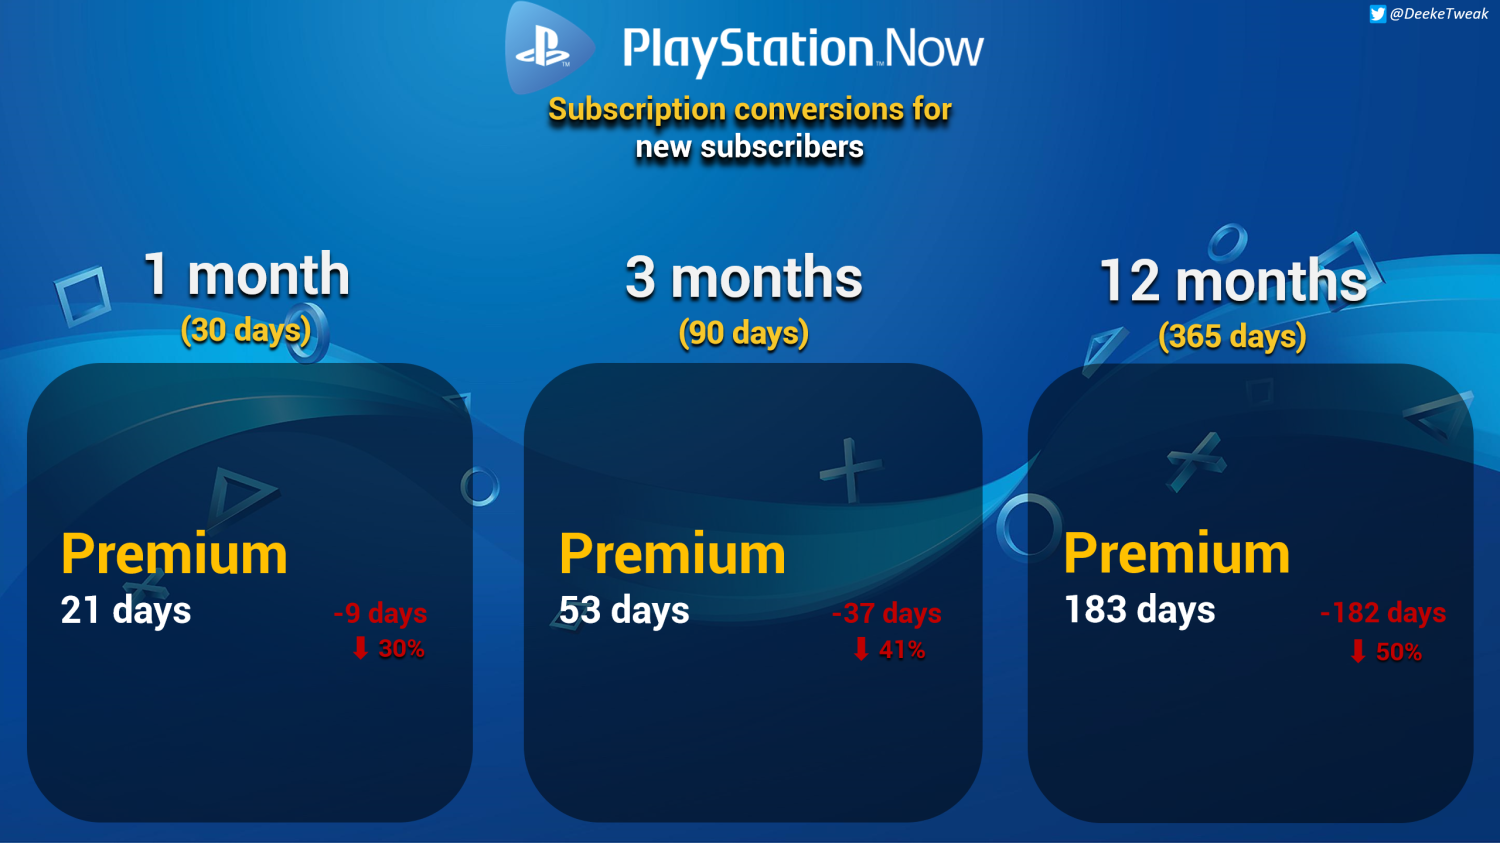 Playstation Plus: Check the new Extra and Premium rates - digitec